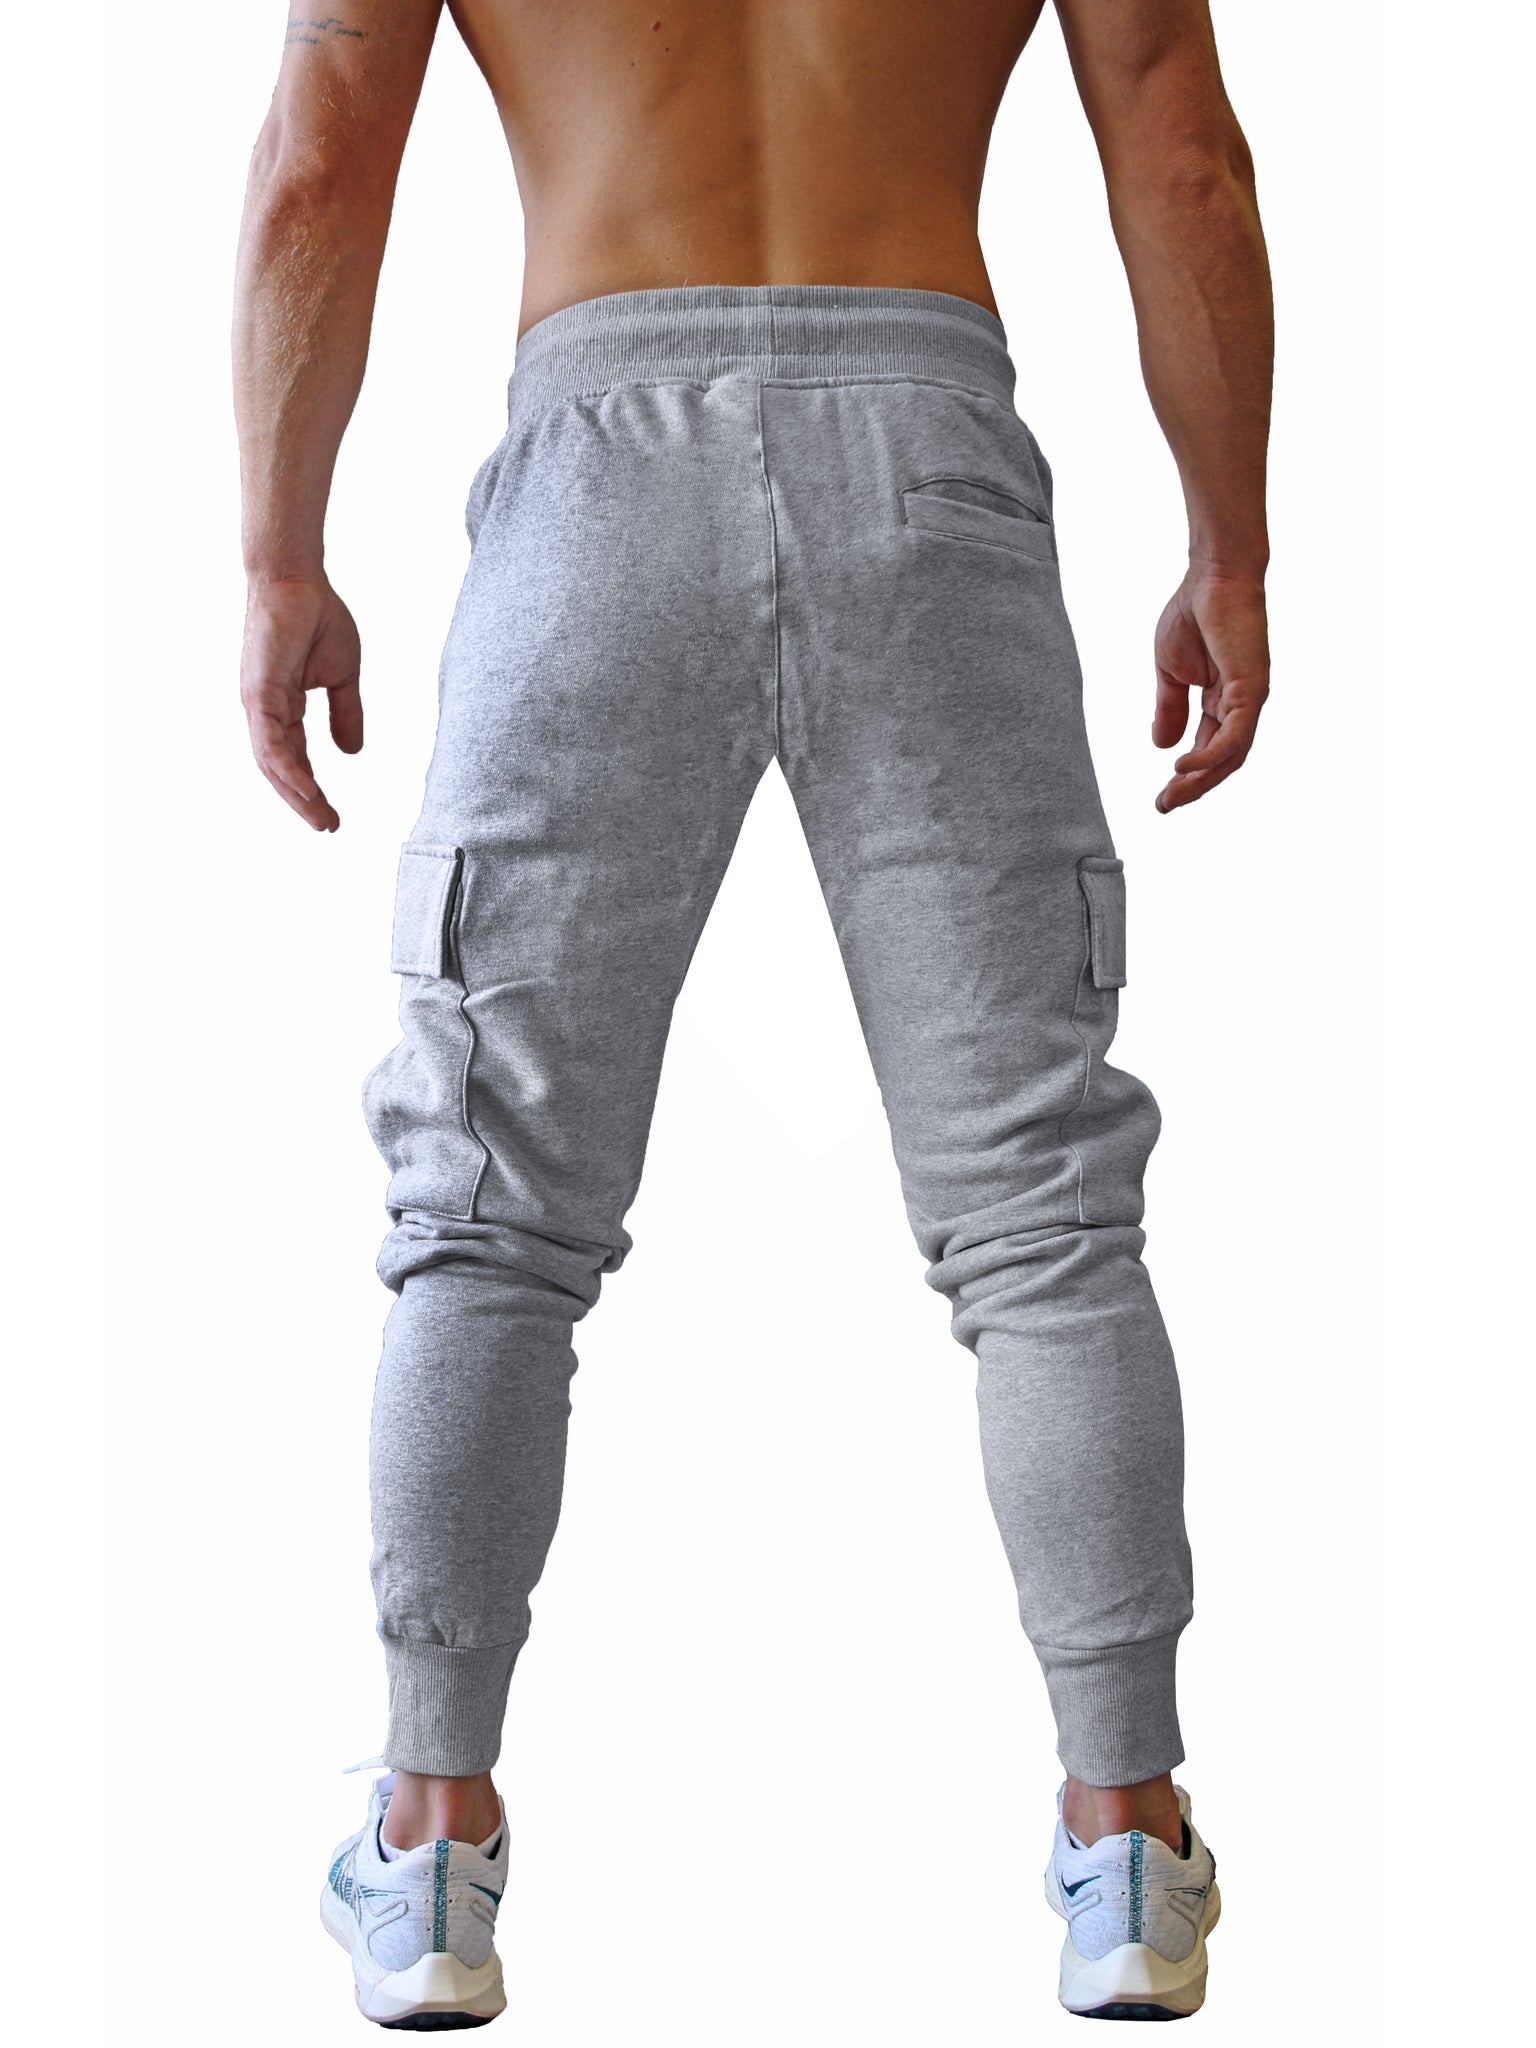 Find the Best Men's Sport and Gym Pants at Gym Generation - Shop